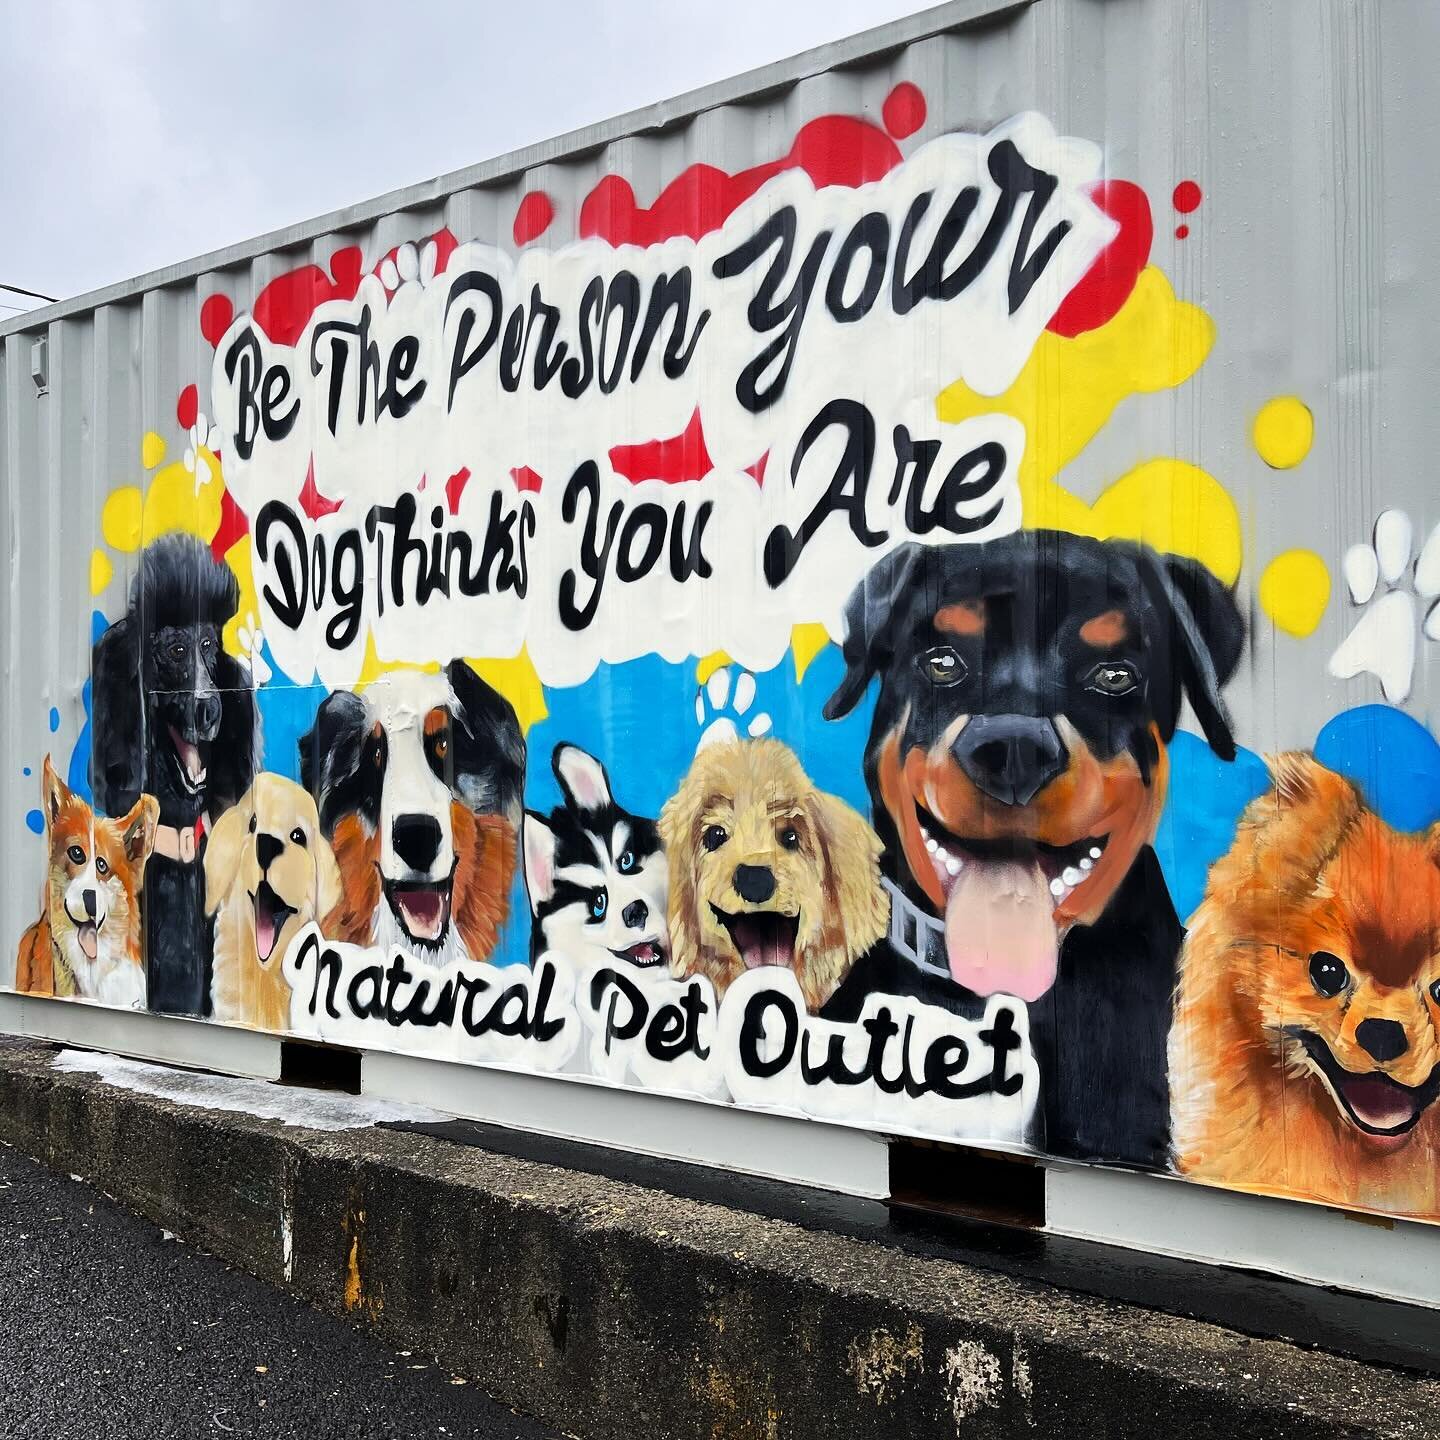 🌟 Love this quote!

&ldquo;Be the person your dog thinks you are&rdquo;

Thanks @jpaizstudios for this great mural at @naturalpetoutlet 🐶 🐾 next to @uncommonlydriven fitness studio!

#art #mural #muralist #artist #streetart #fairfieldct #fairfield